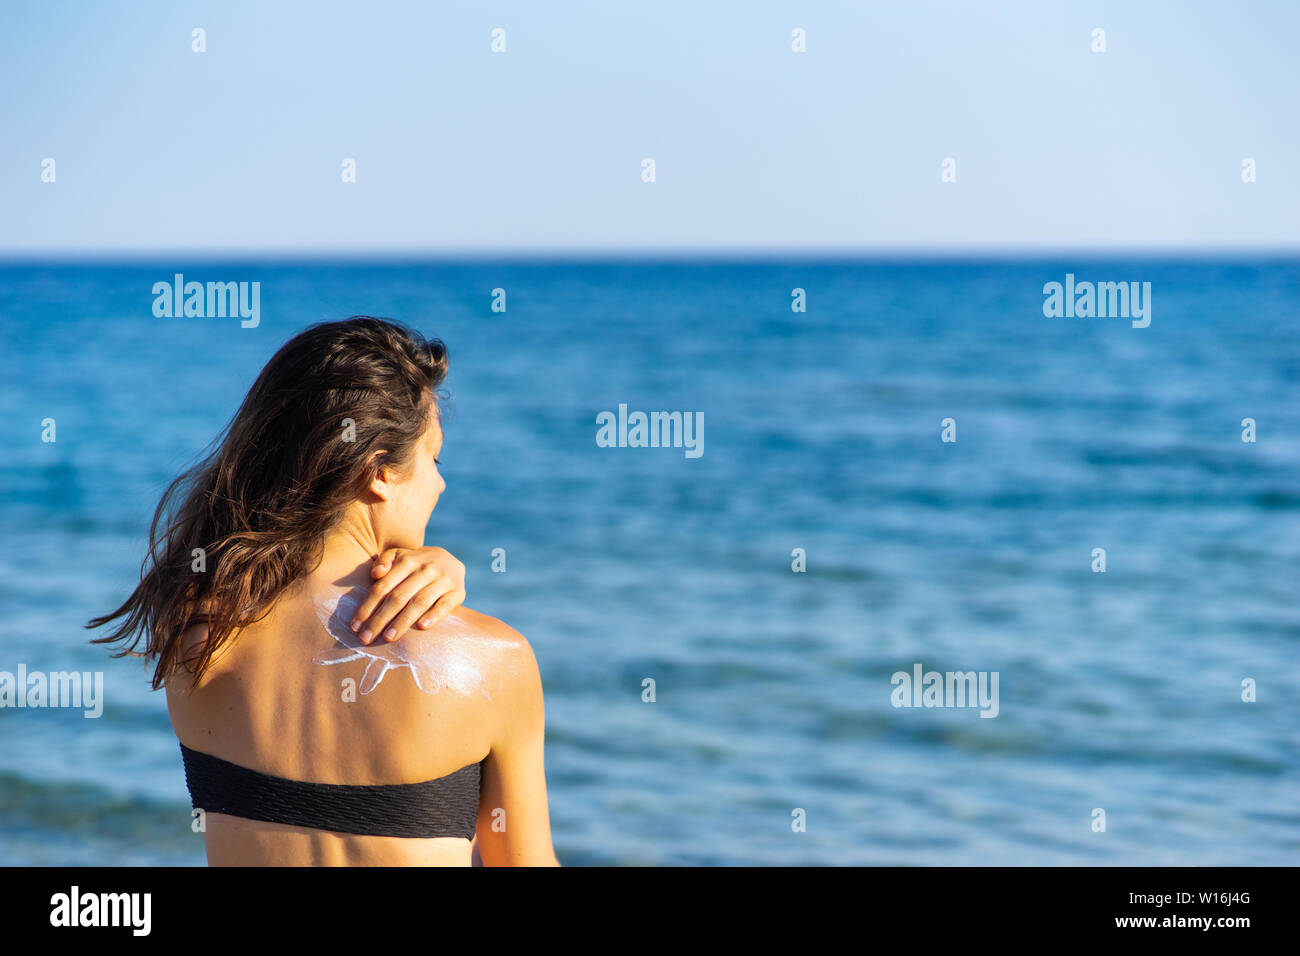 young woman with dark hair applying sun cream to her back while sitting on the beach Stock Photo